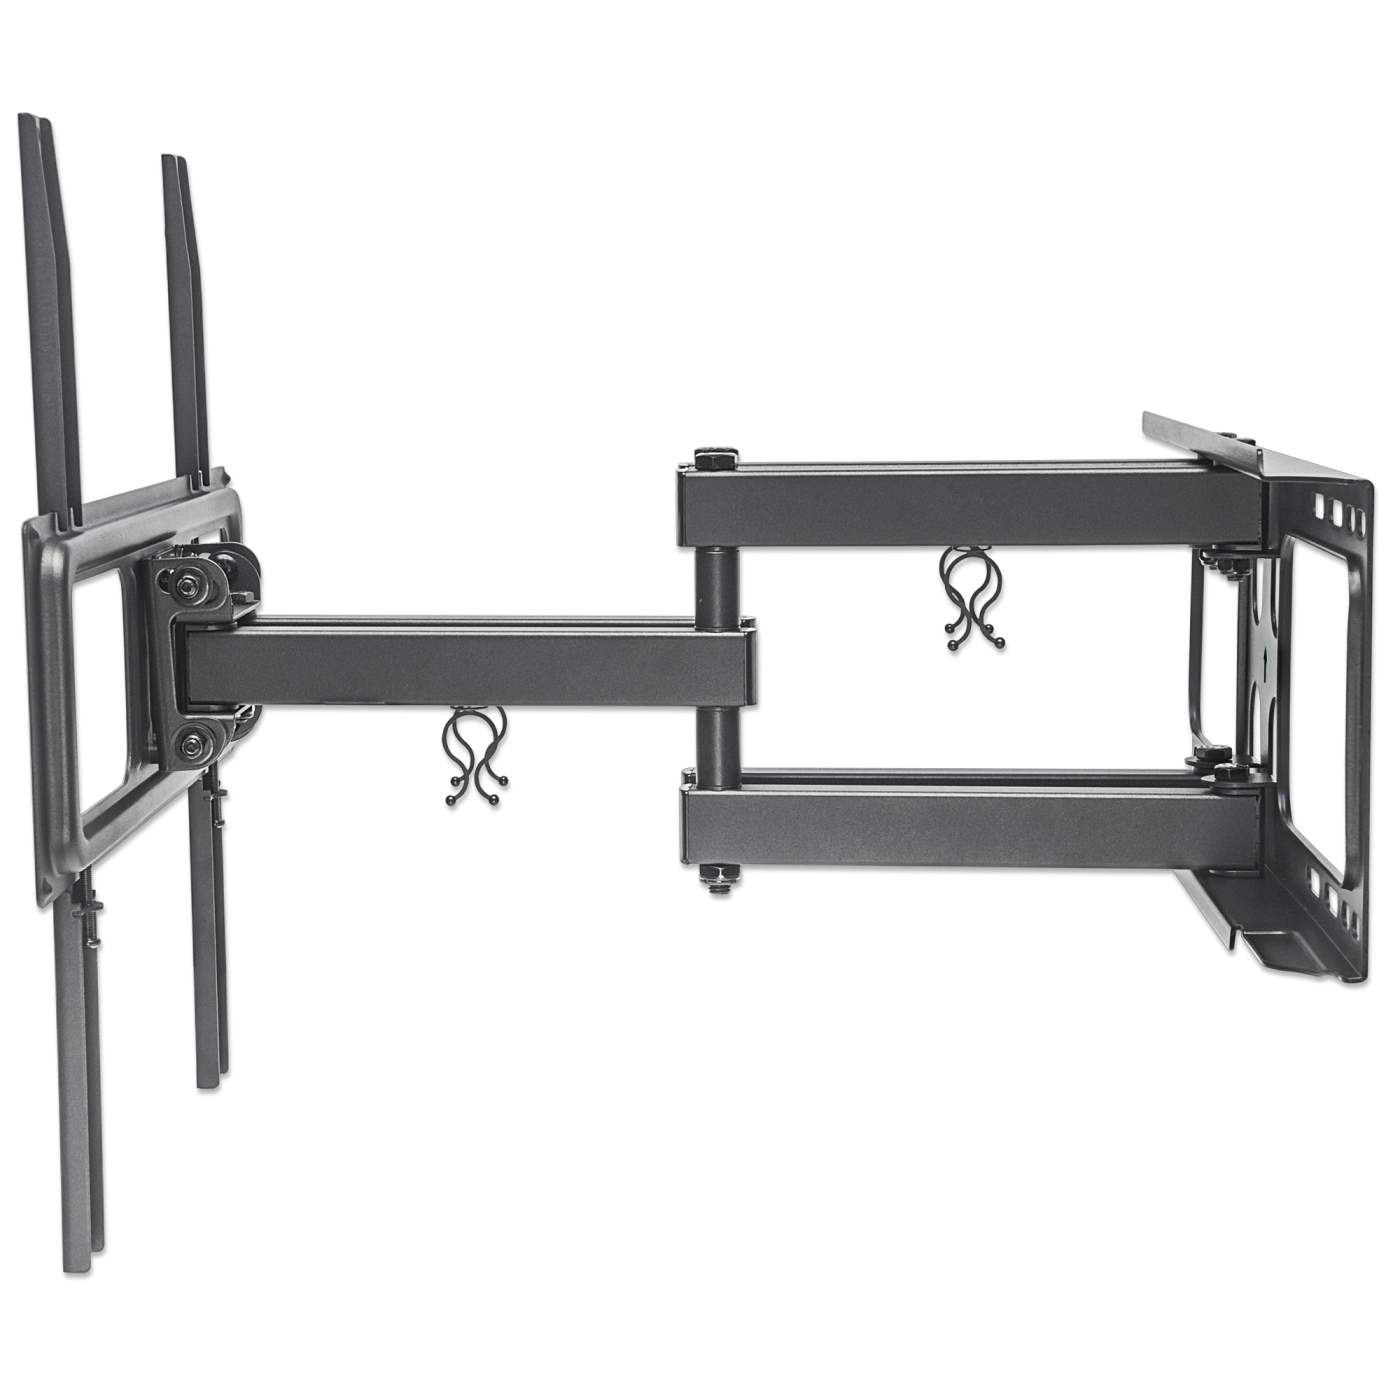 Full-Motion TV Wall Mount with Post-Leveling Adjustment Image 4